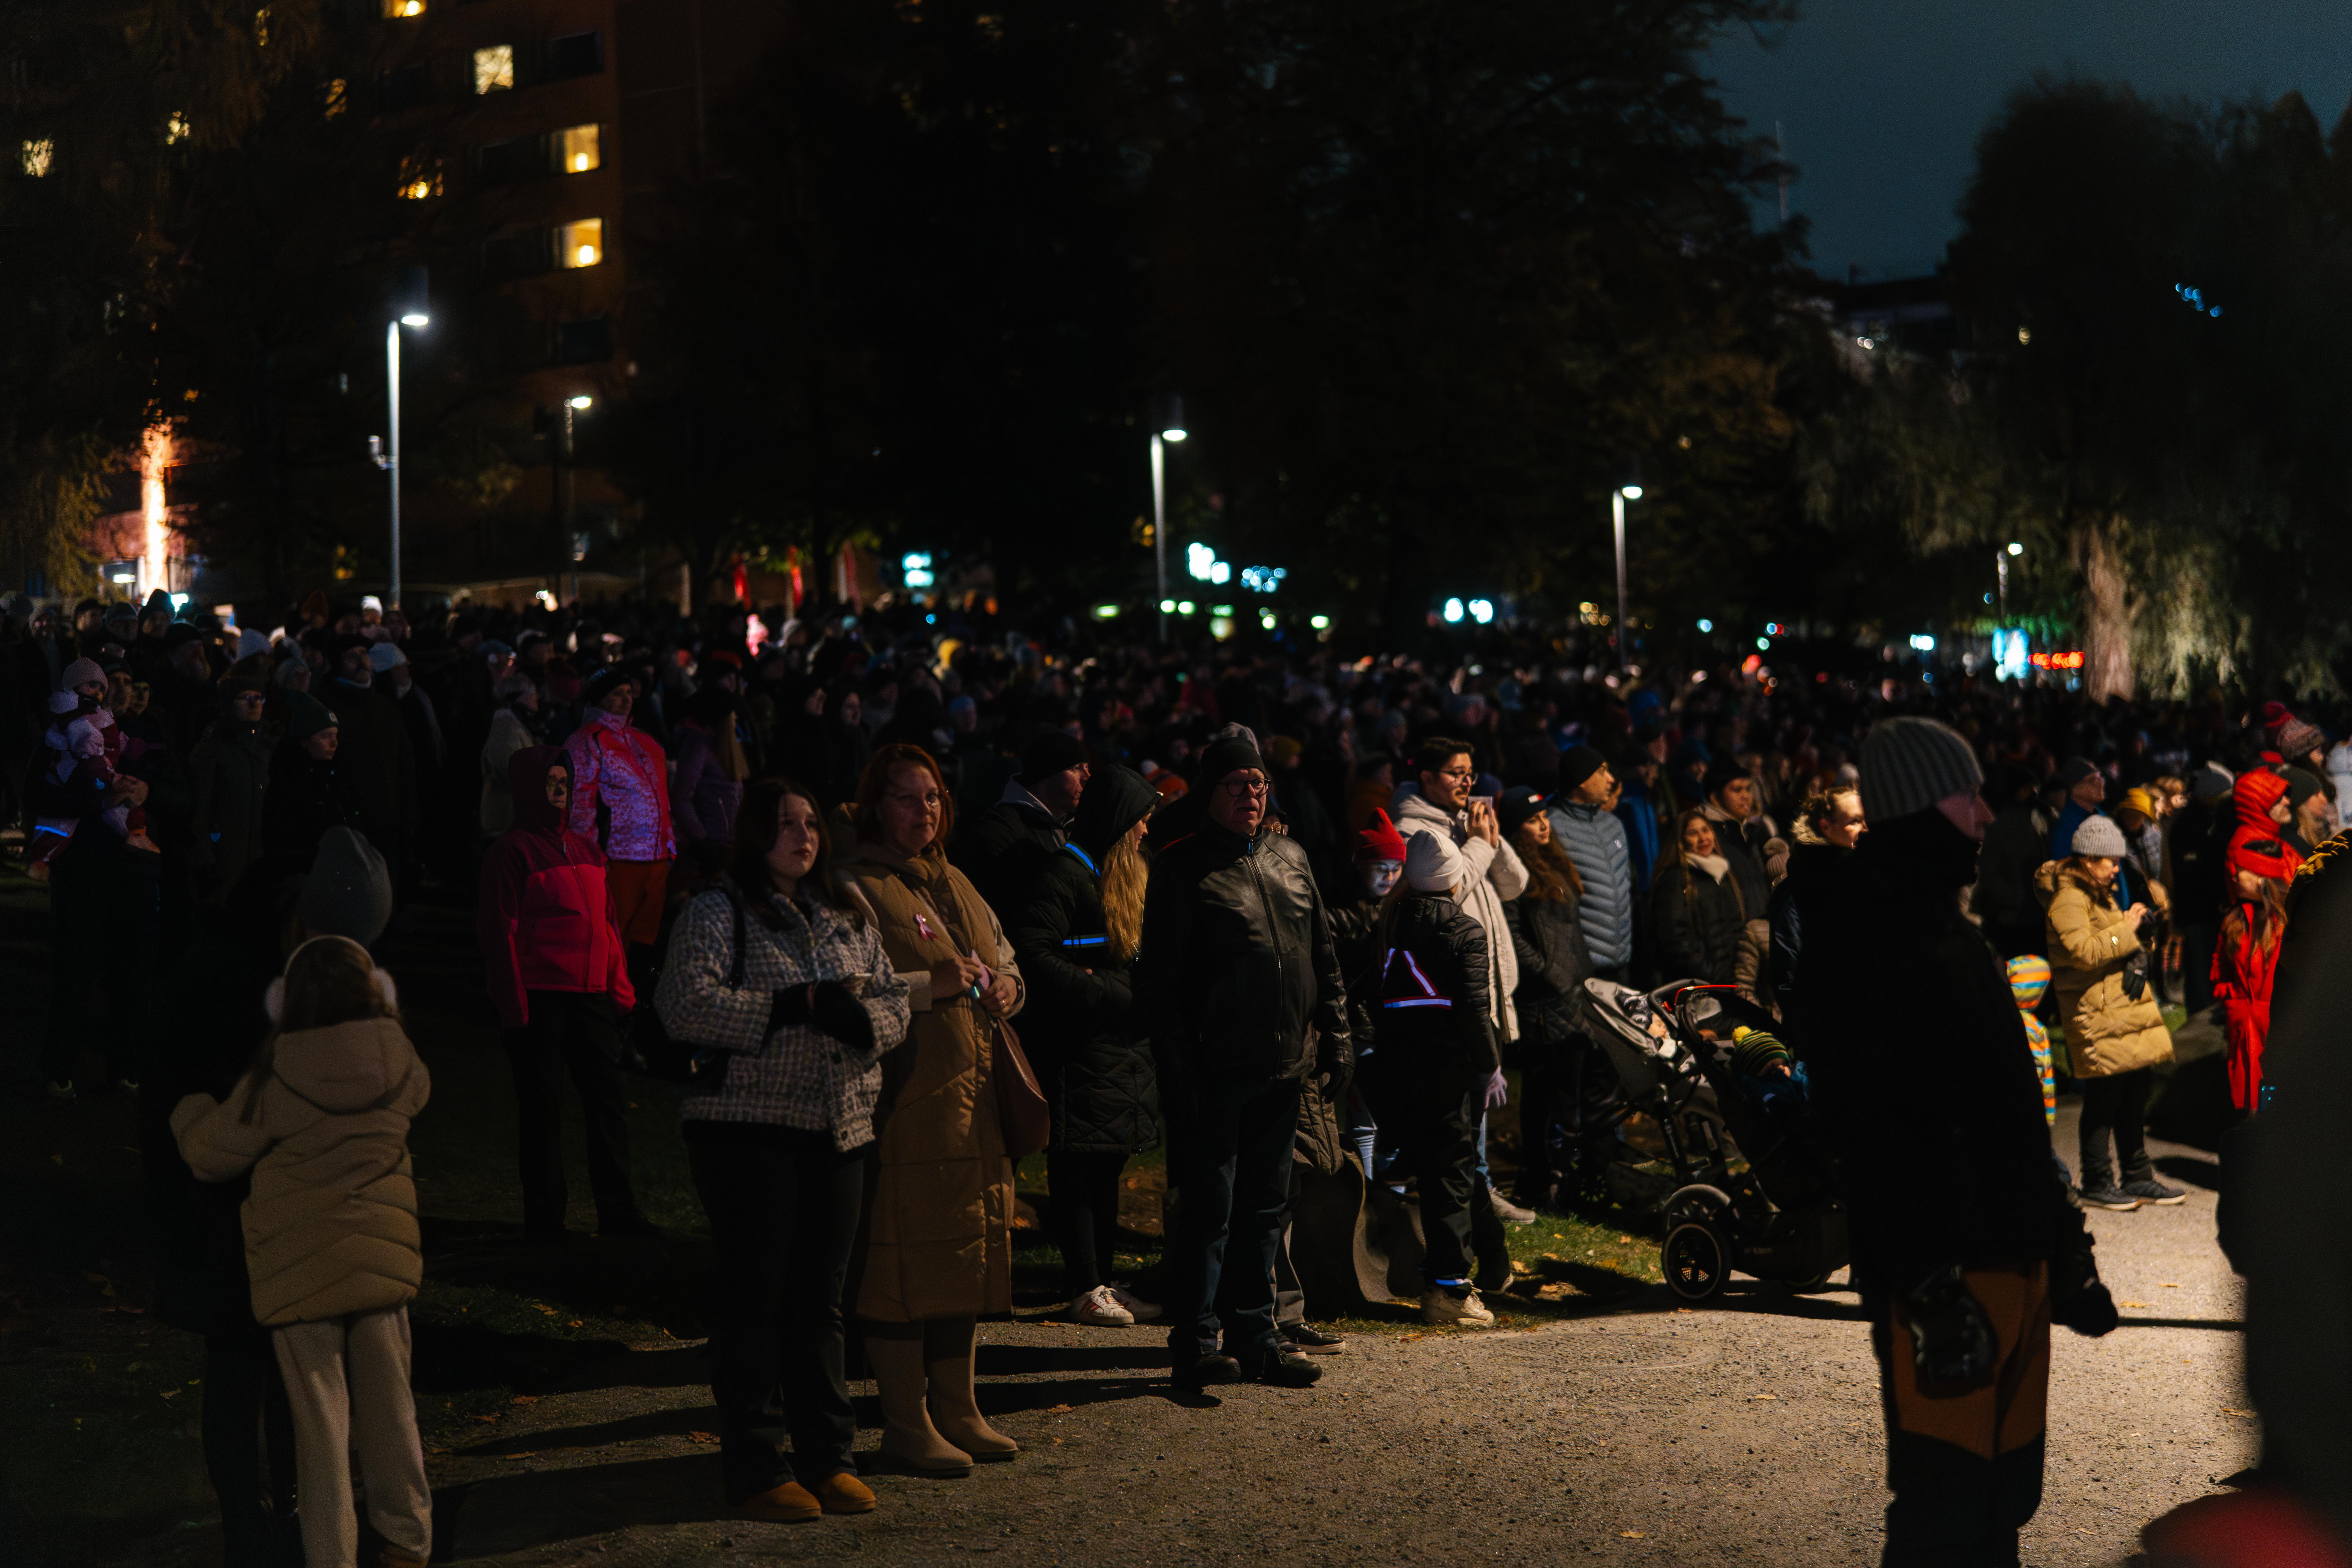 Tampere Festival of Light audience in Koskipuisto Park.